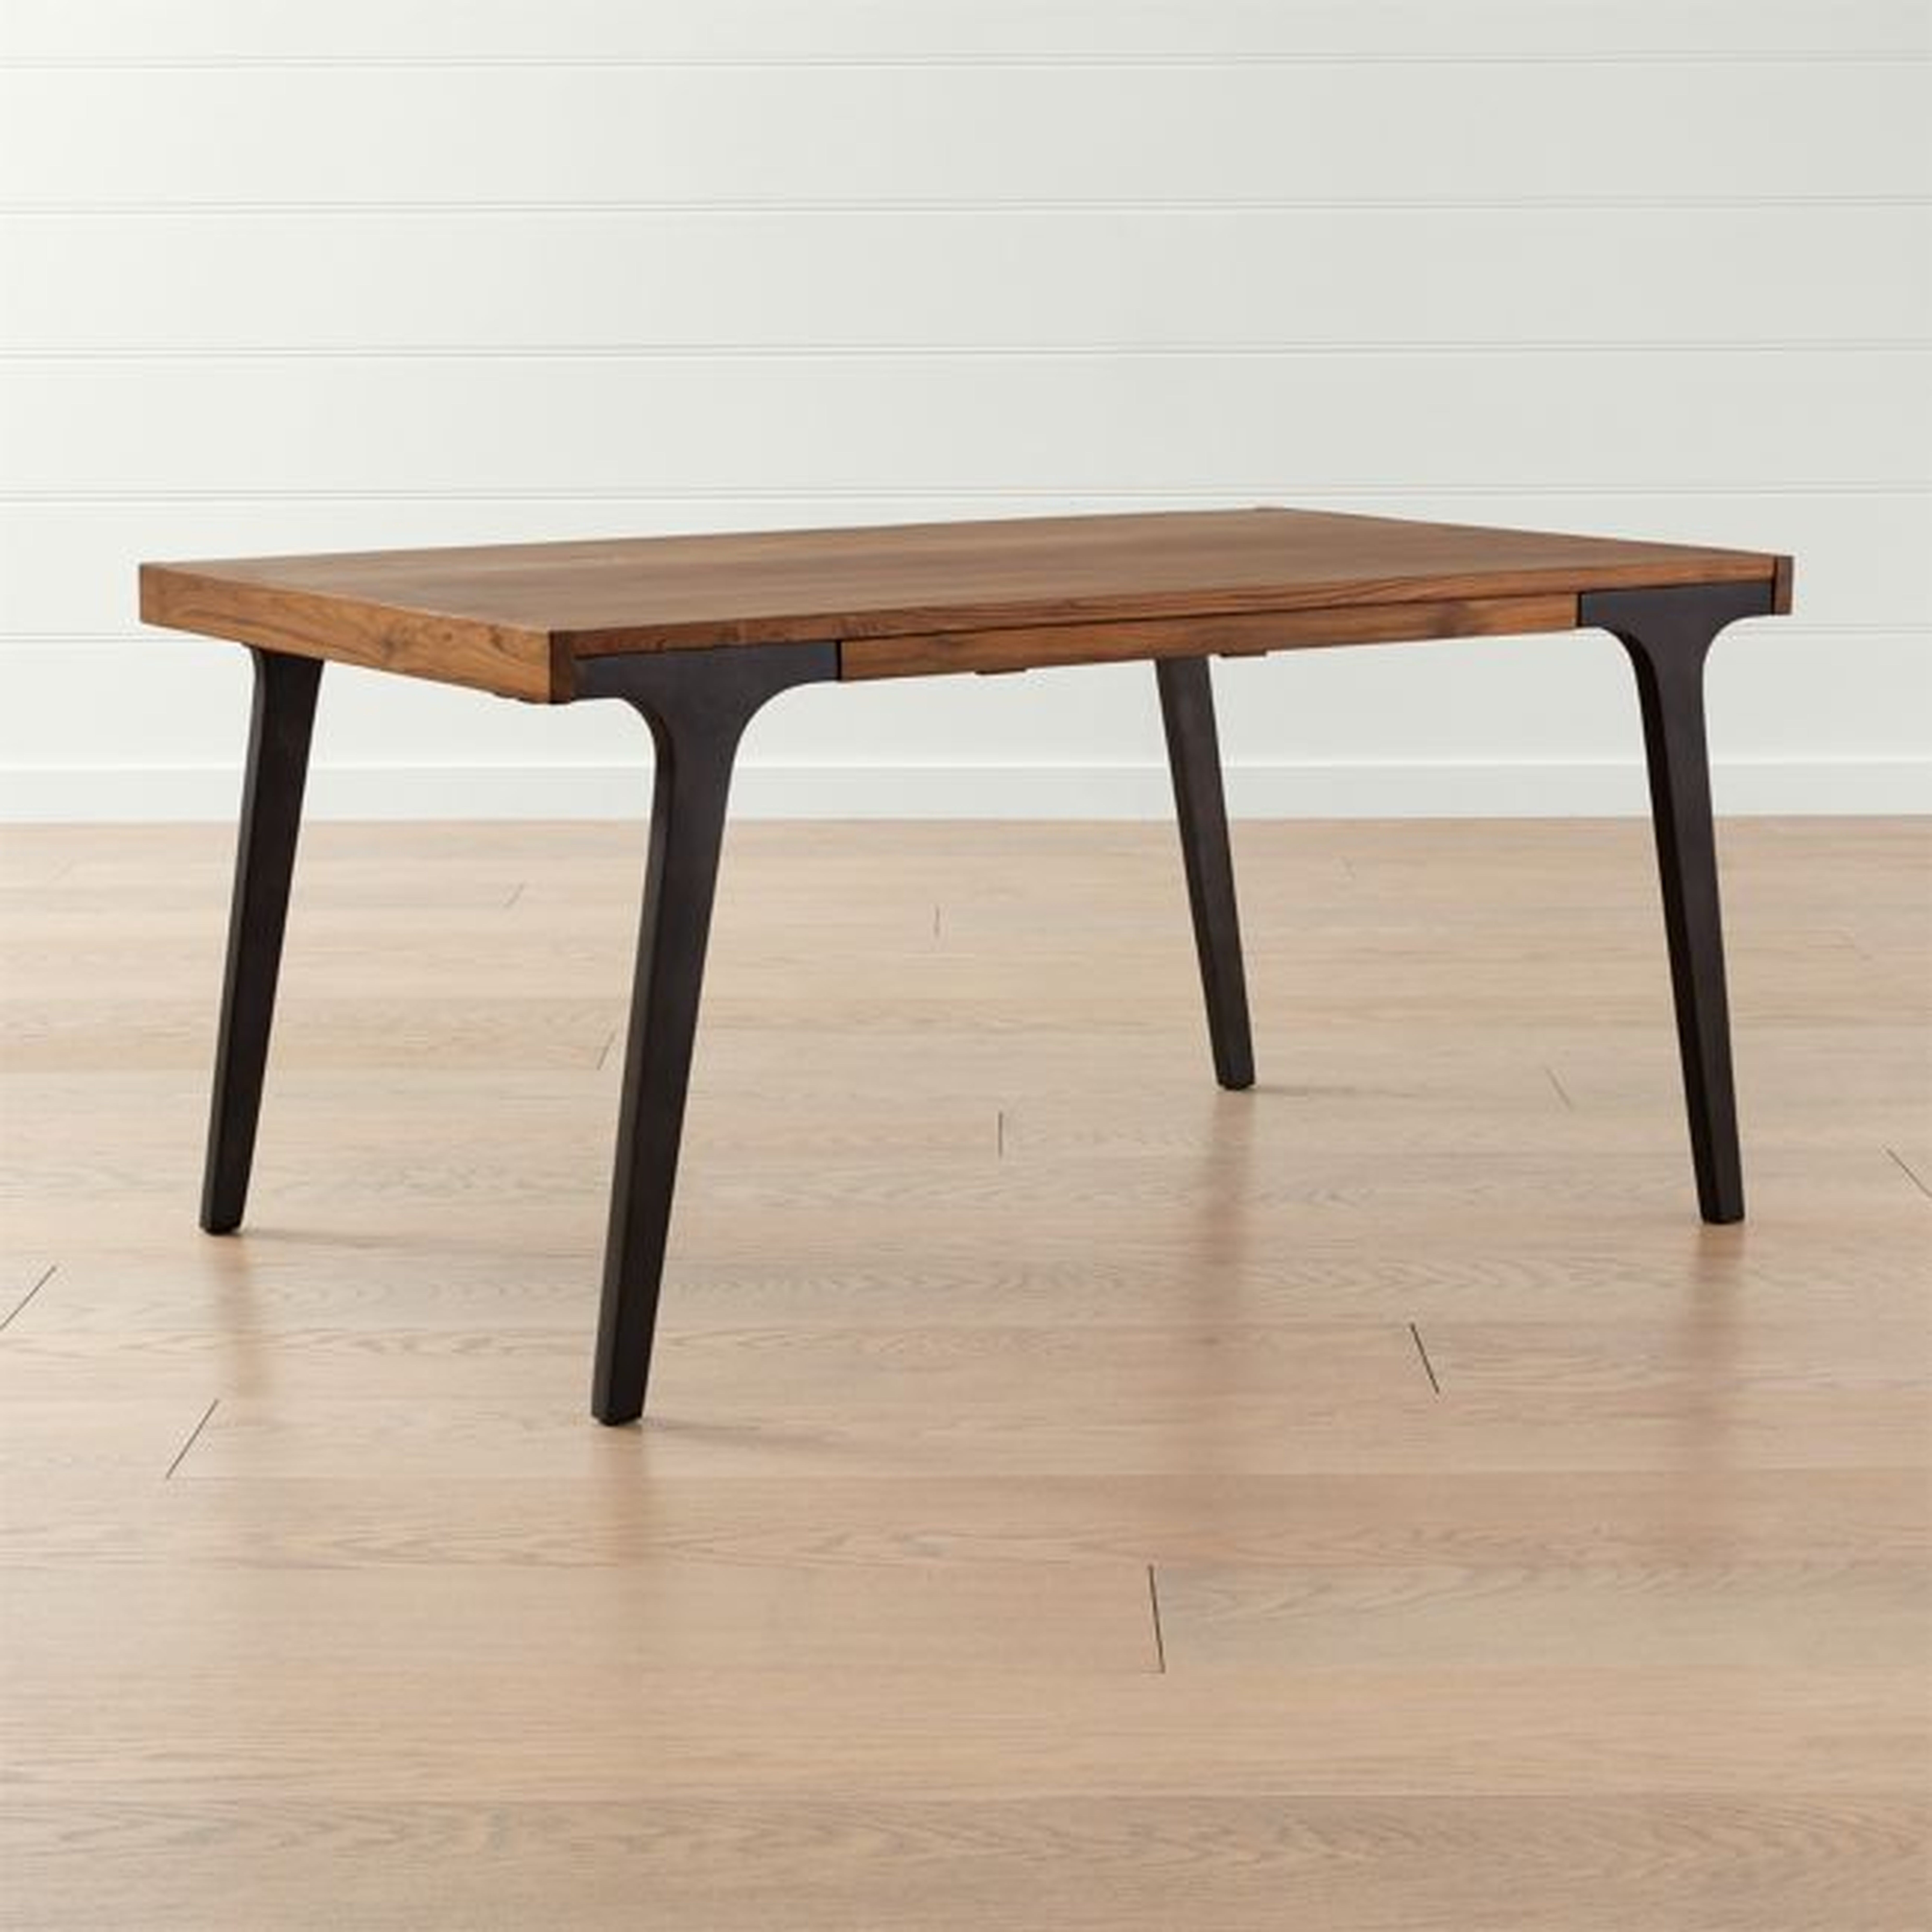 Lakin 61" Teak Extendable Dining Table - Crate and Barrel